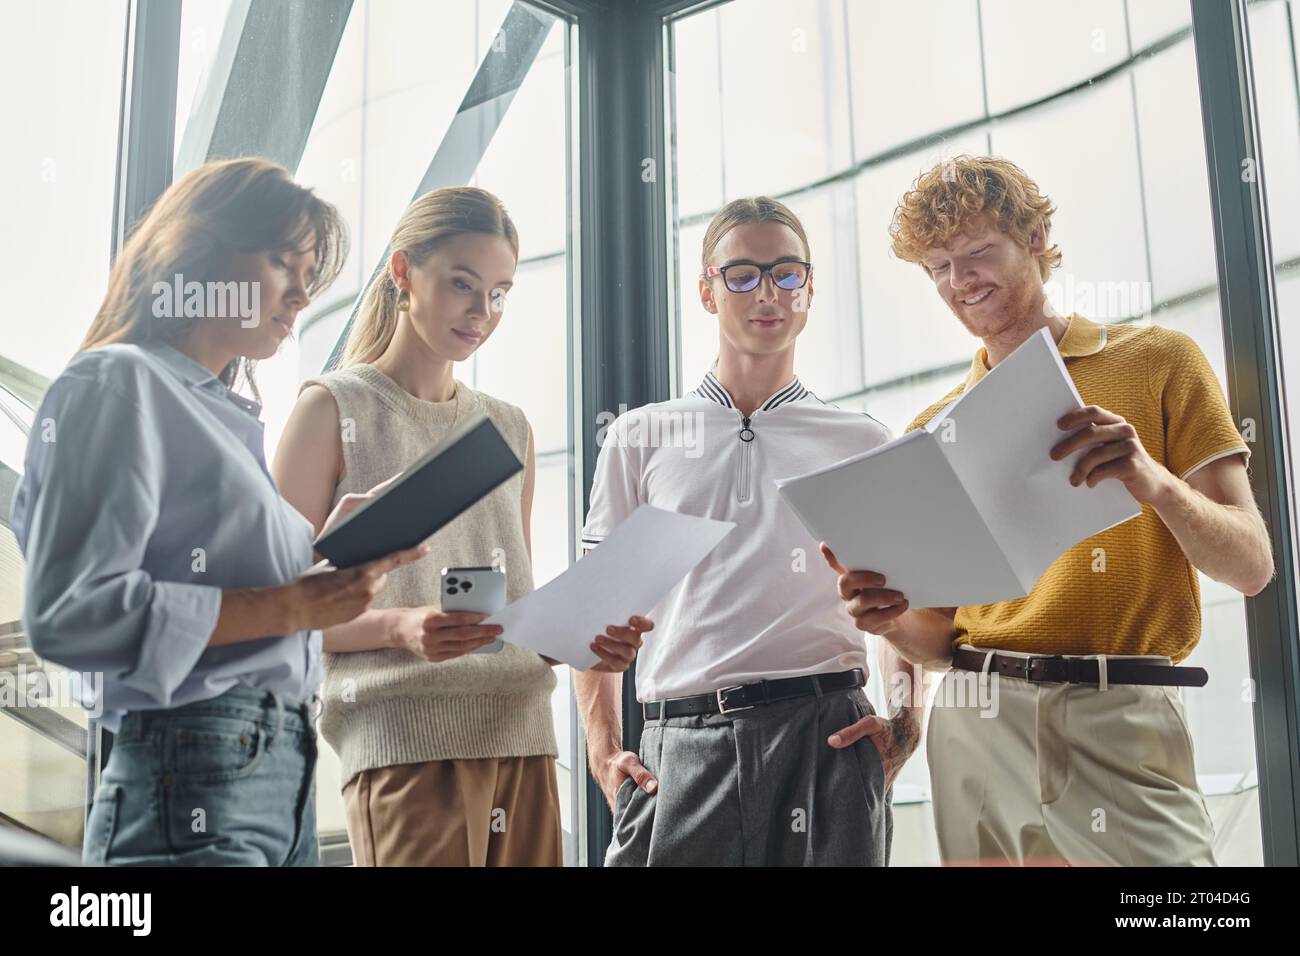 four coworkers in smart wear smiling, holding working papers and phone, close up, coworking concept Stock Photo